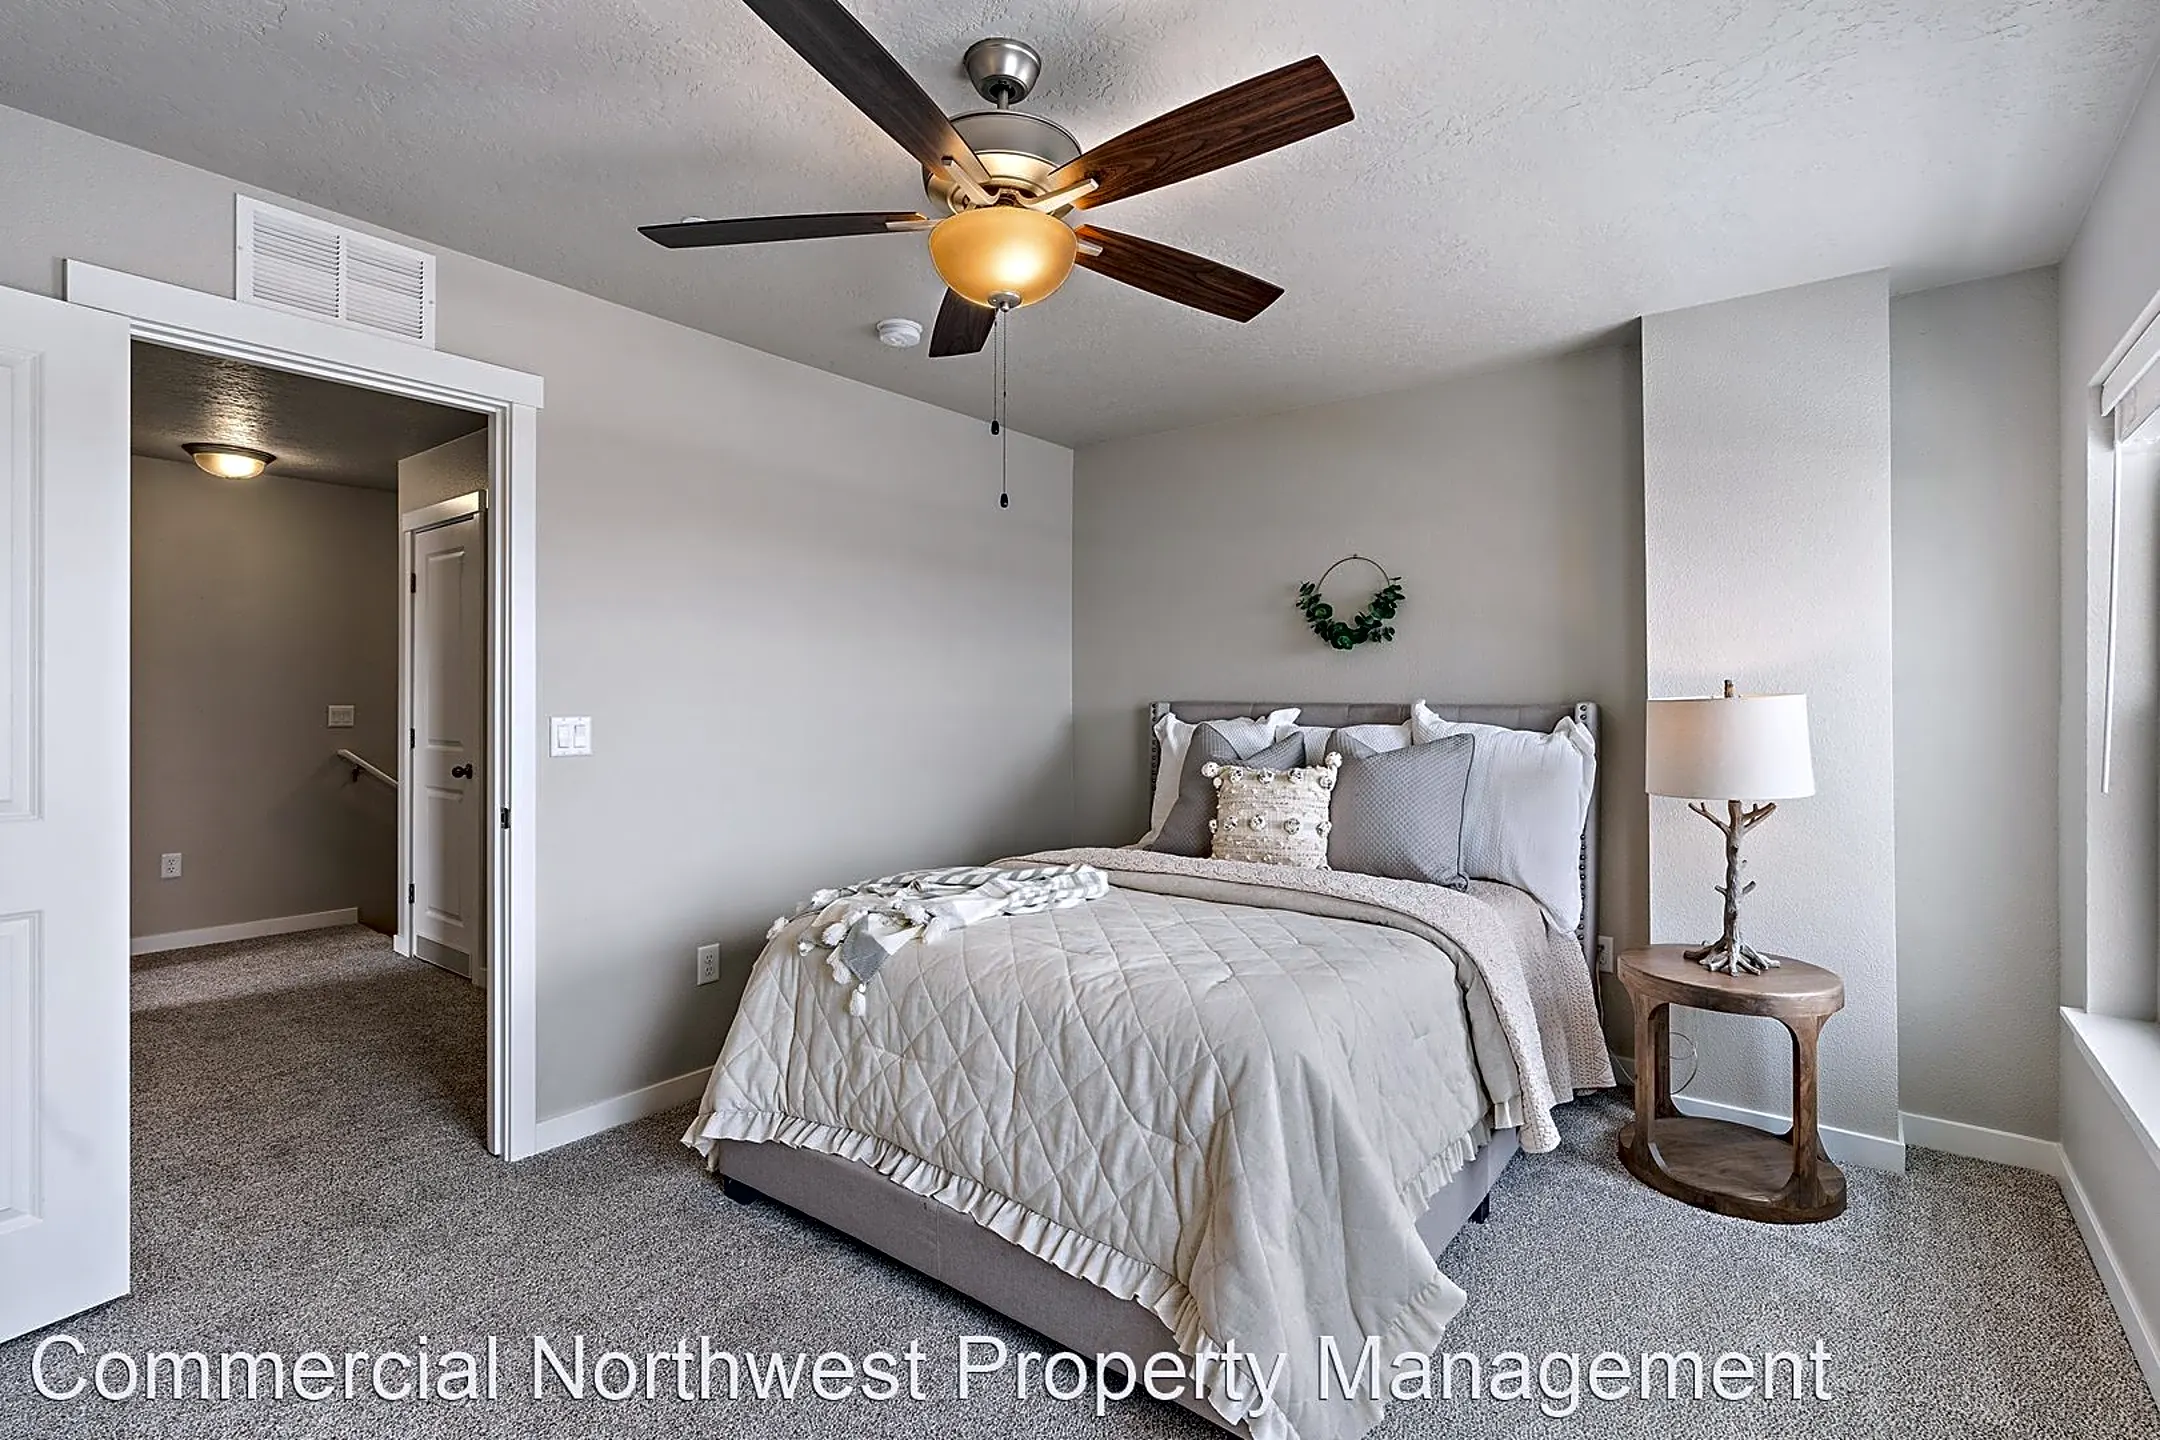 Bedroom - Sunnyvale Village ! 1 Month Free for All Move-ins before 3/15! - Nampa, ID